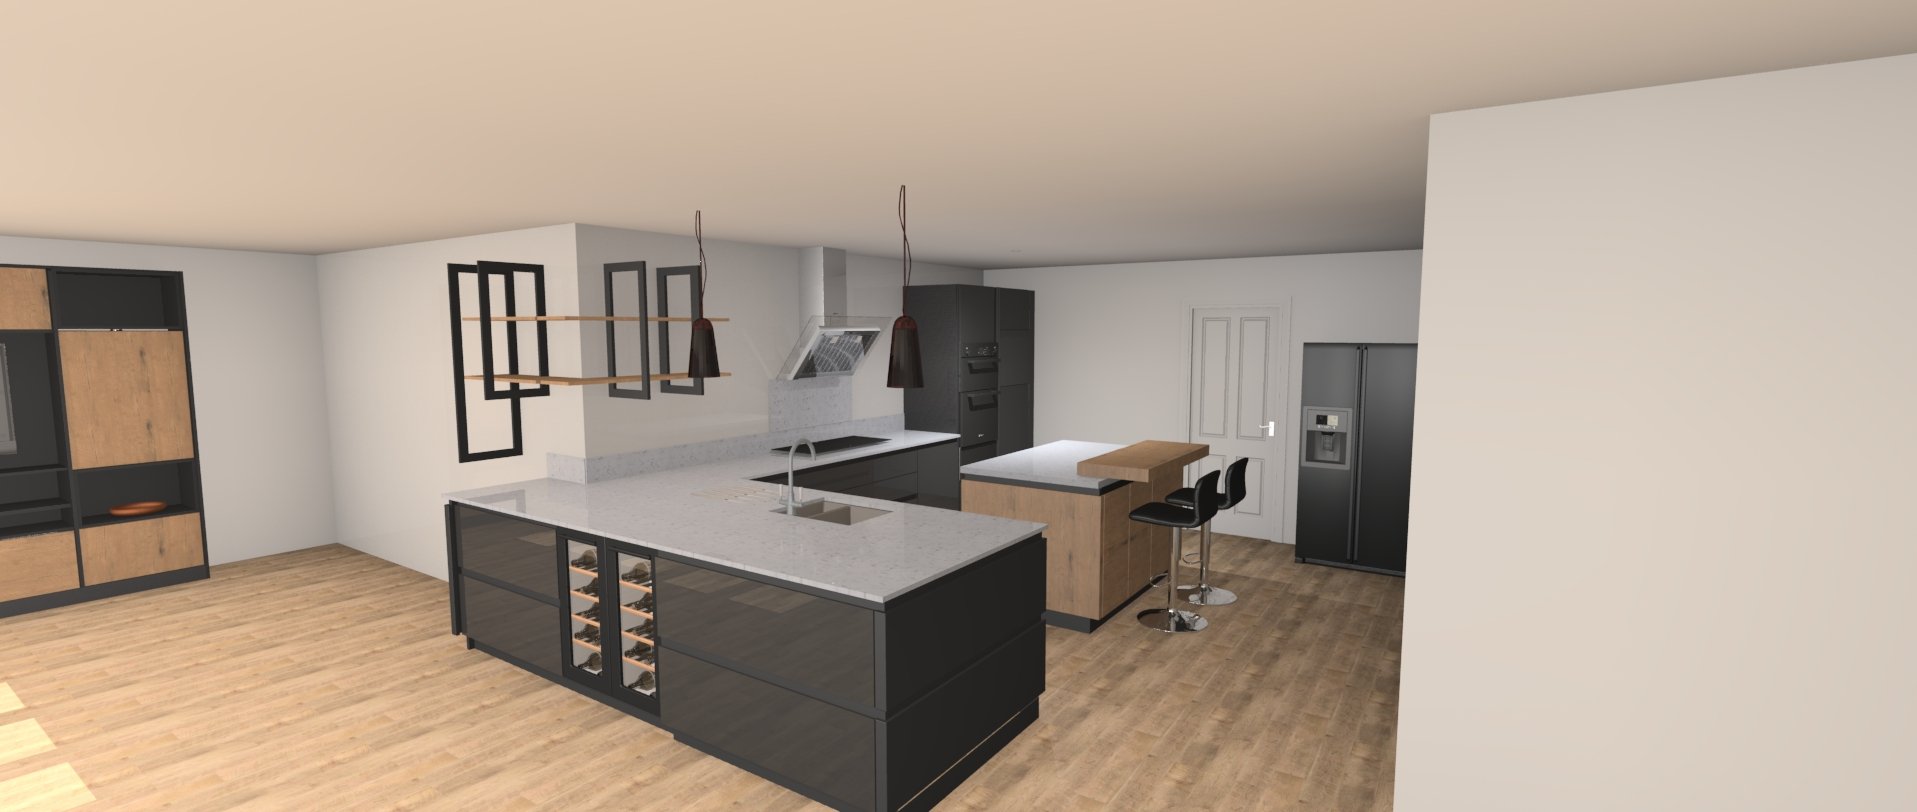 3d image of open plan kitchen